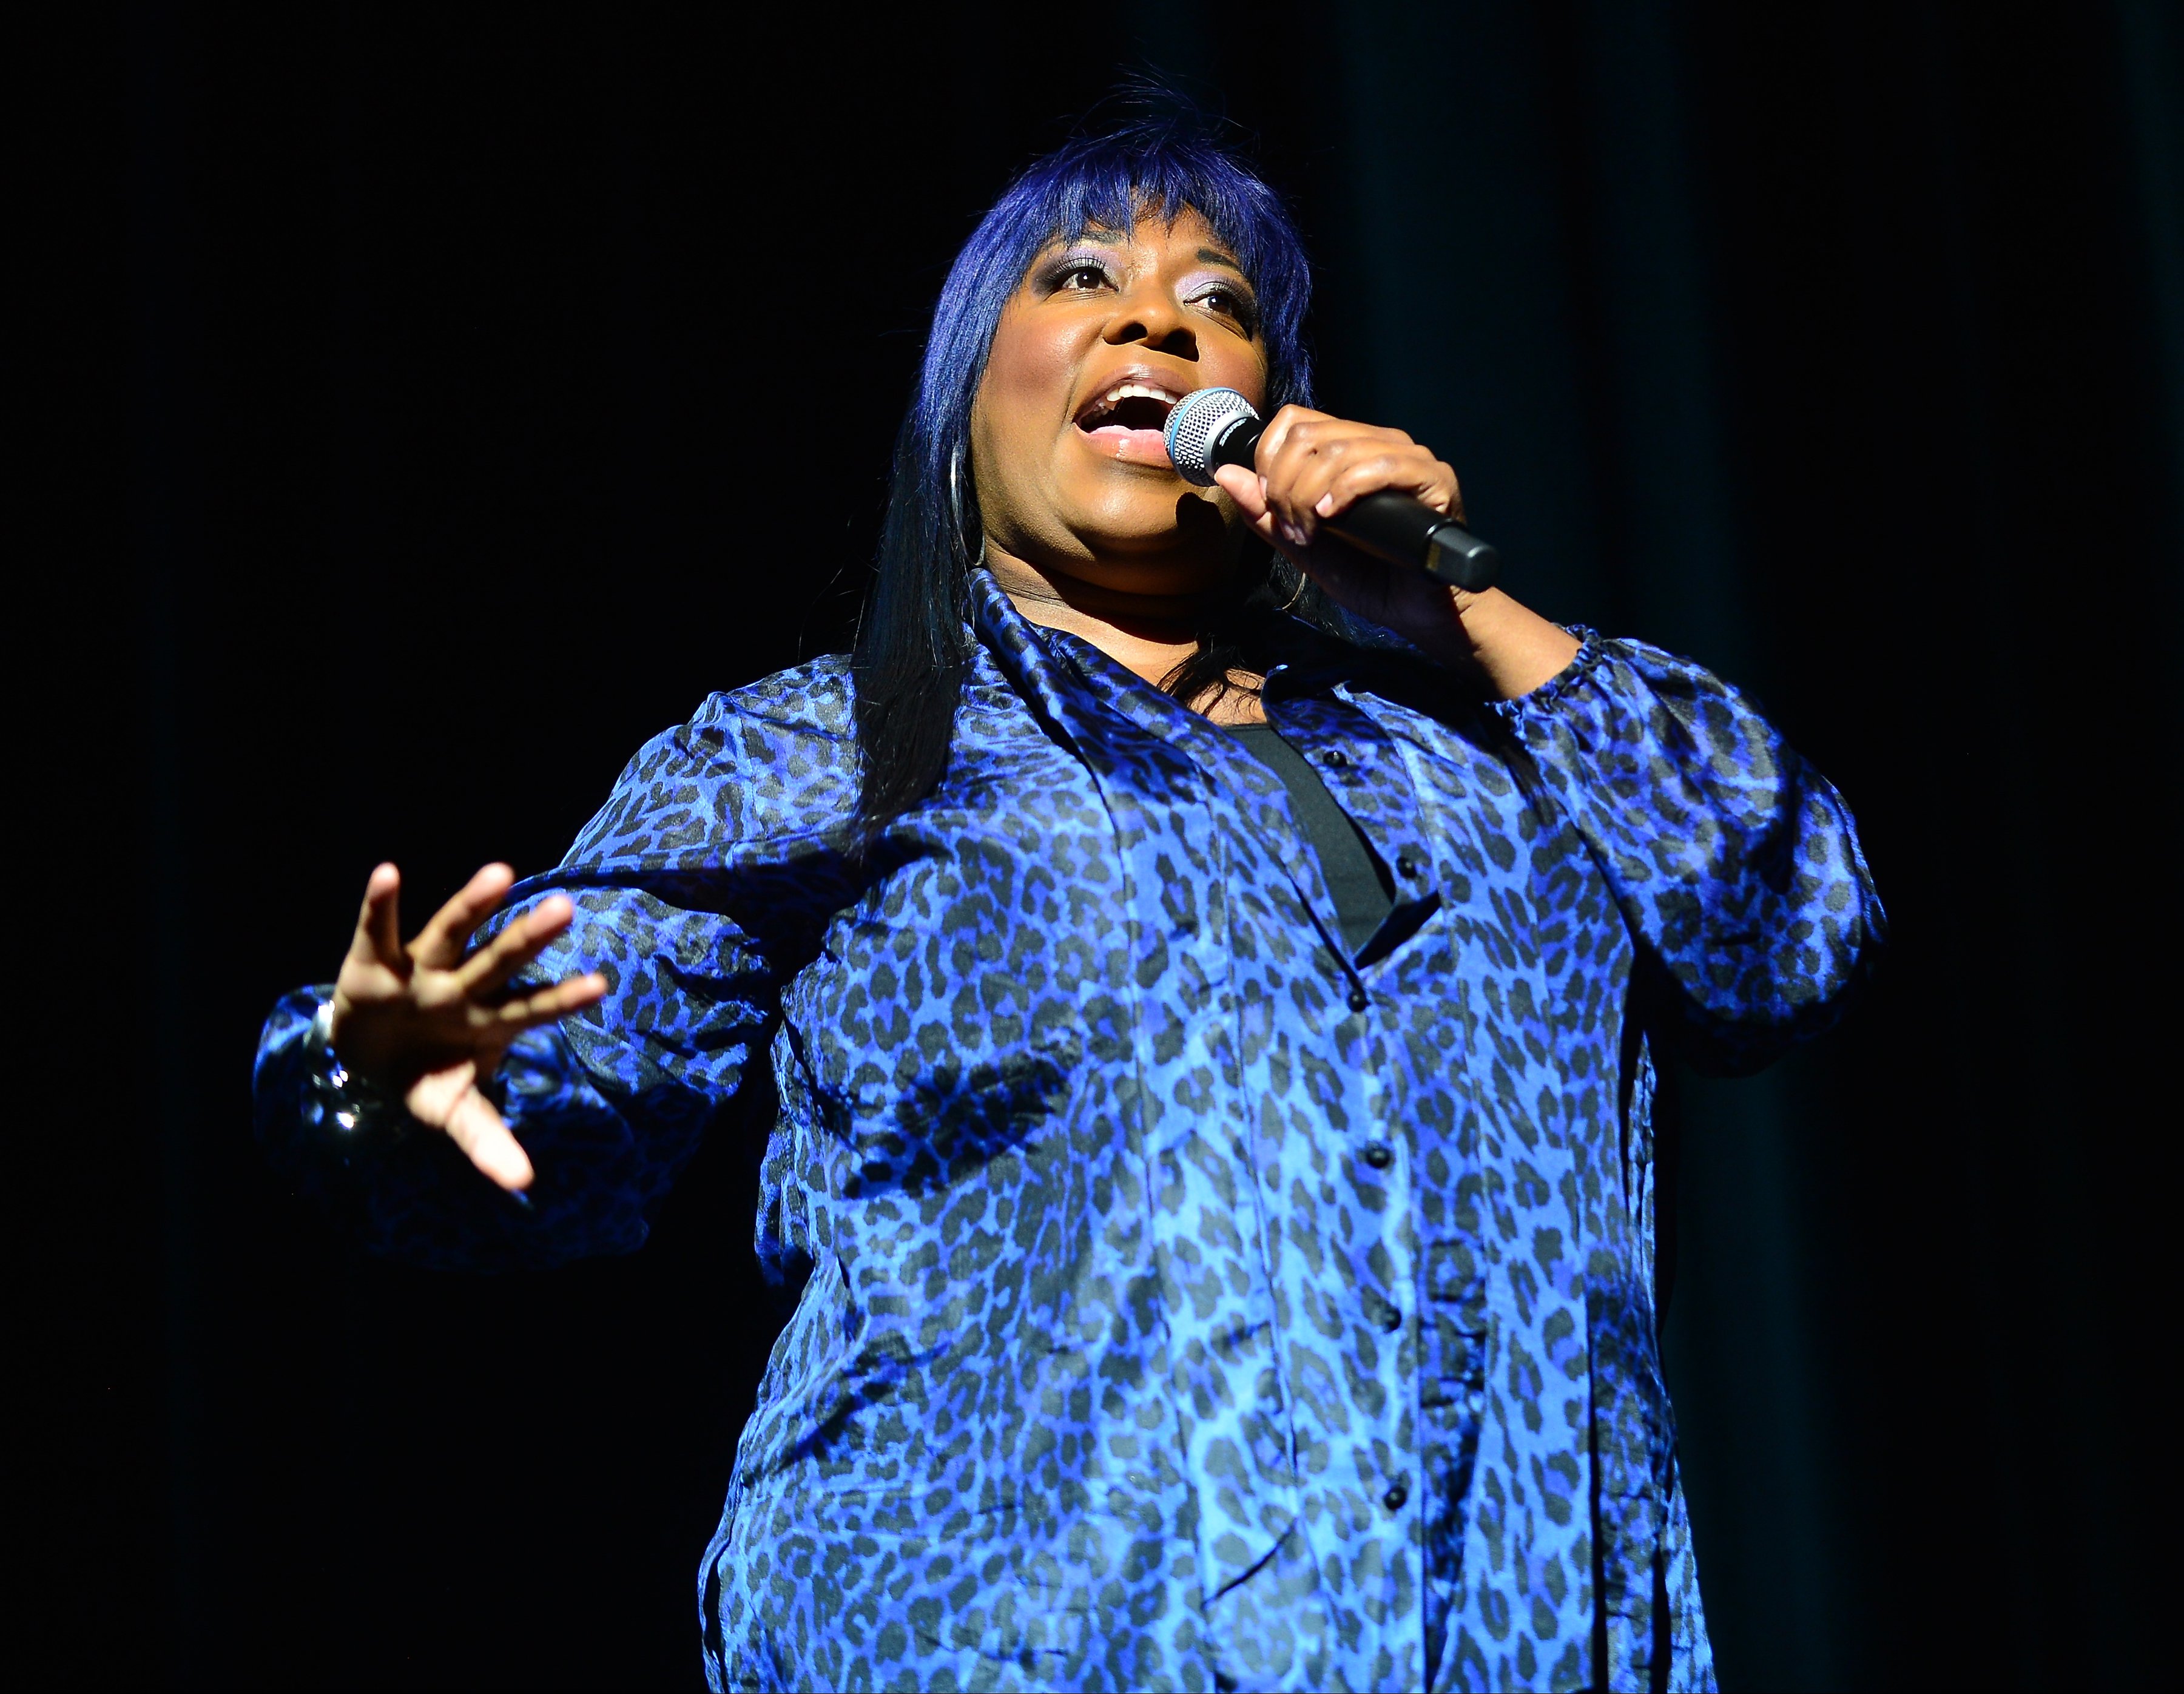  Comedian Loni Love performs during the 8th Annual Memorial Day Weekend Comedy Festival at James L Knight Center | Photo: Getty Images